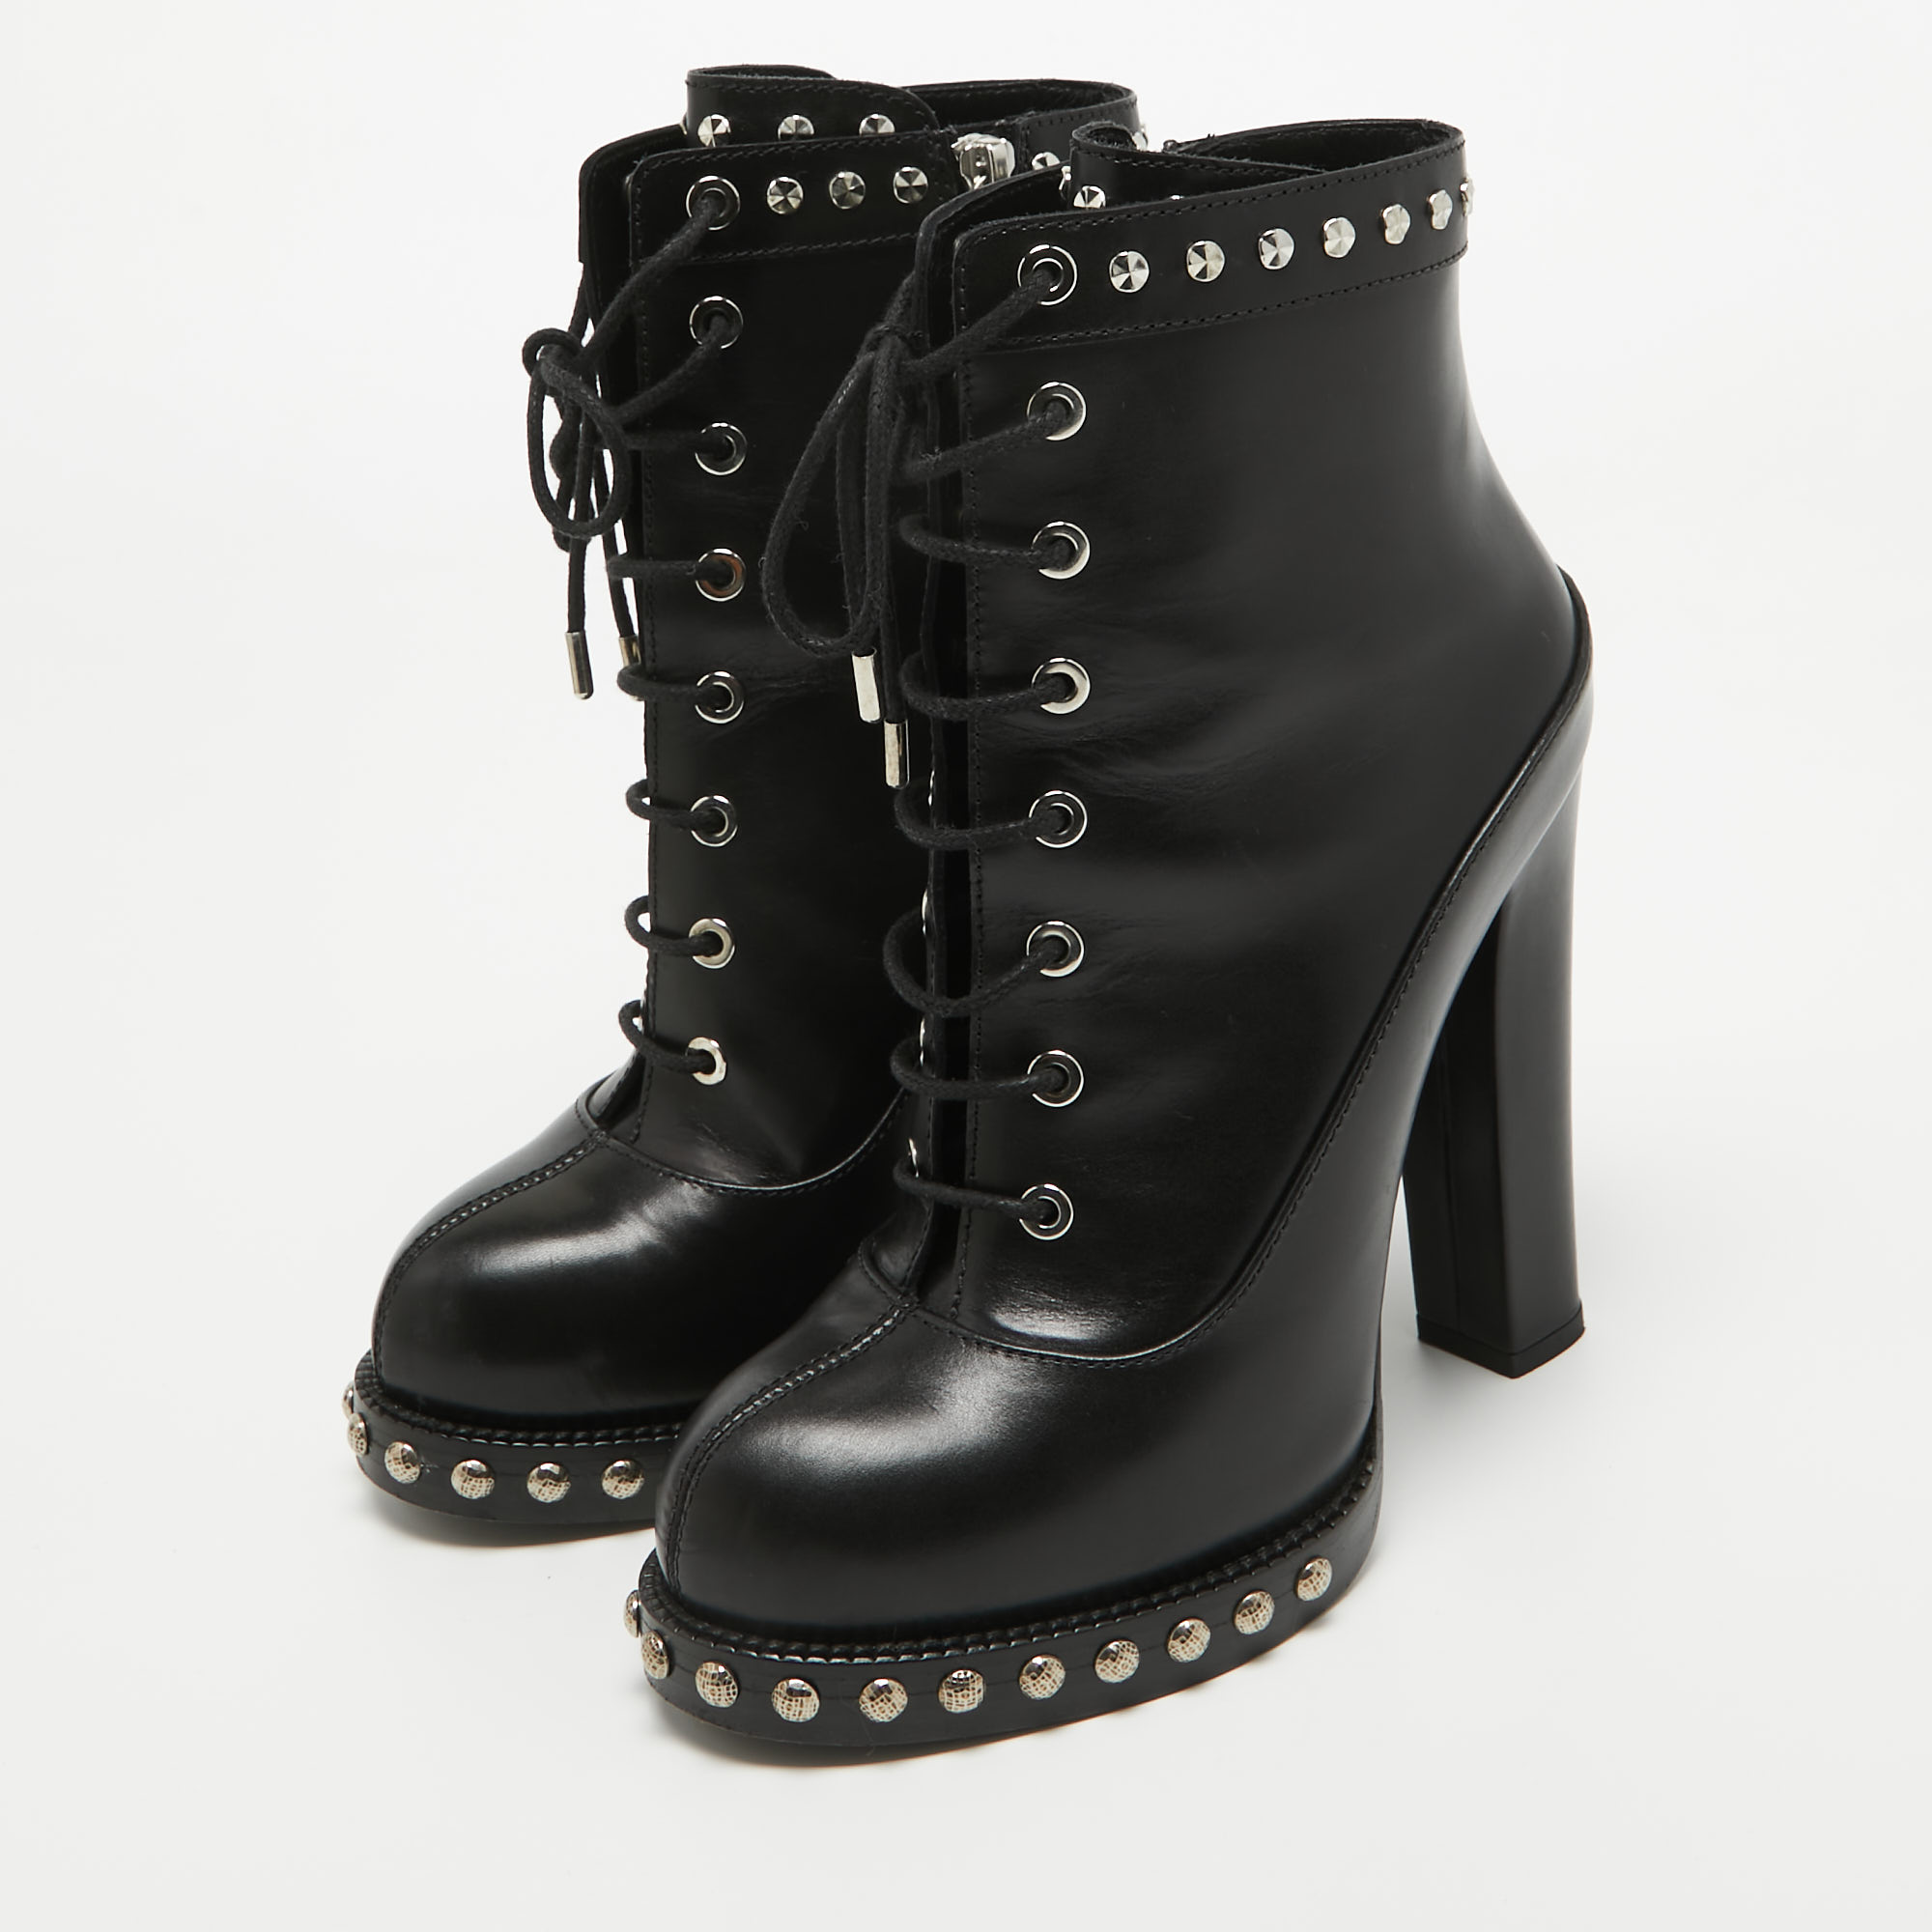 

Alexander McQueen Black Leather Studded Lace Up Ankle Boots Size